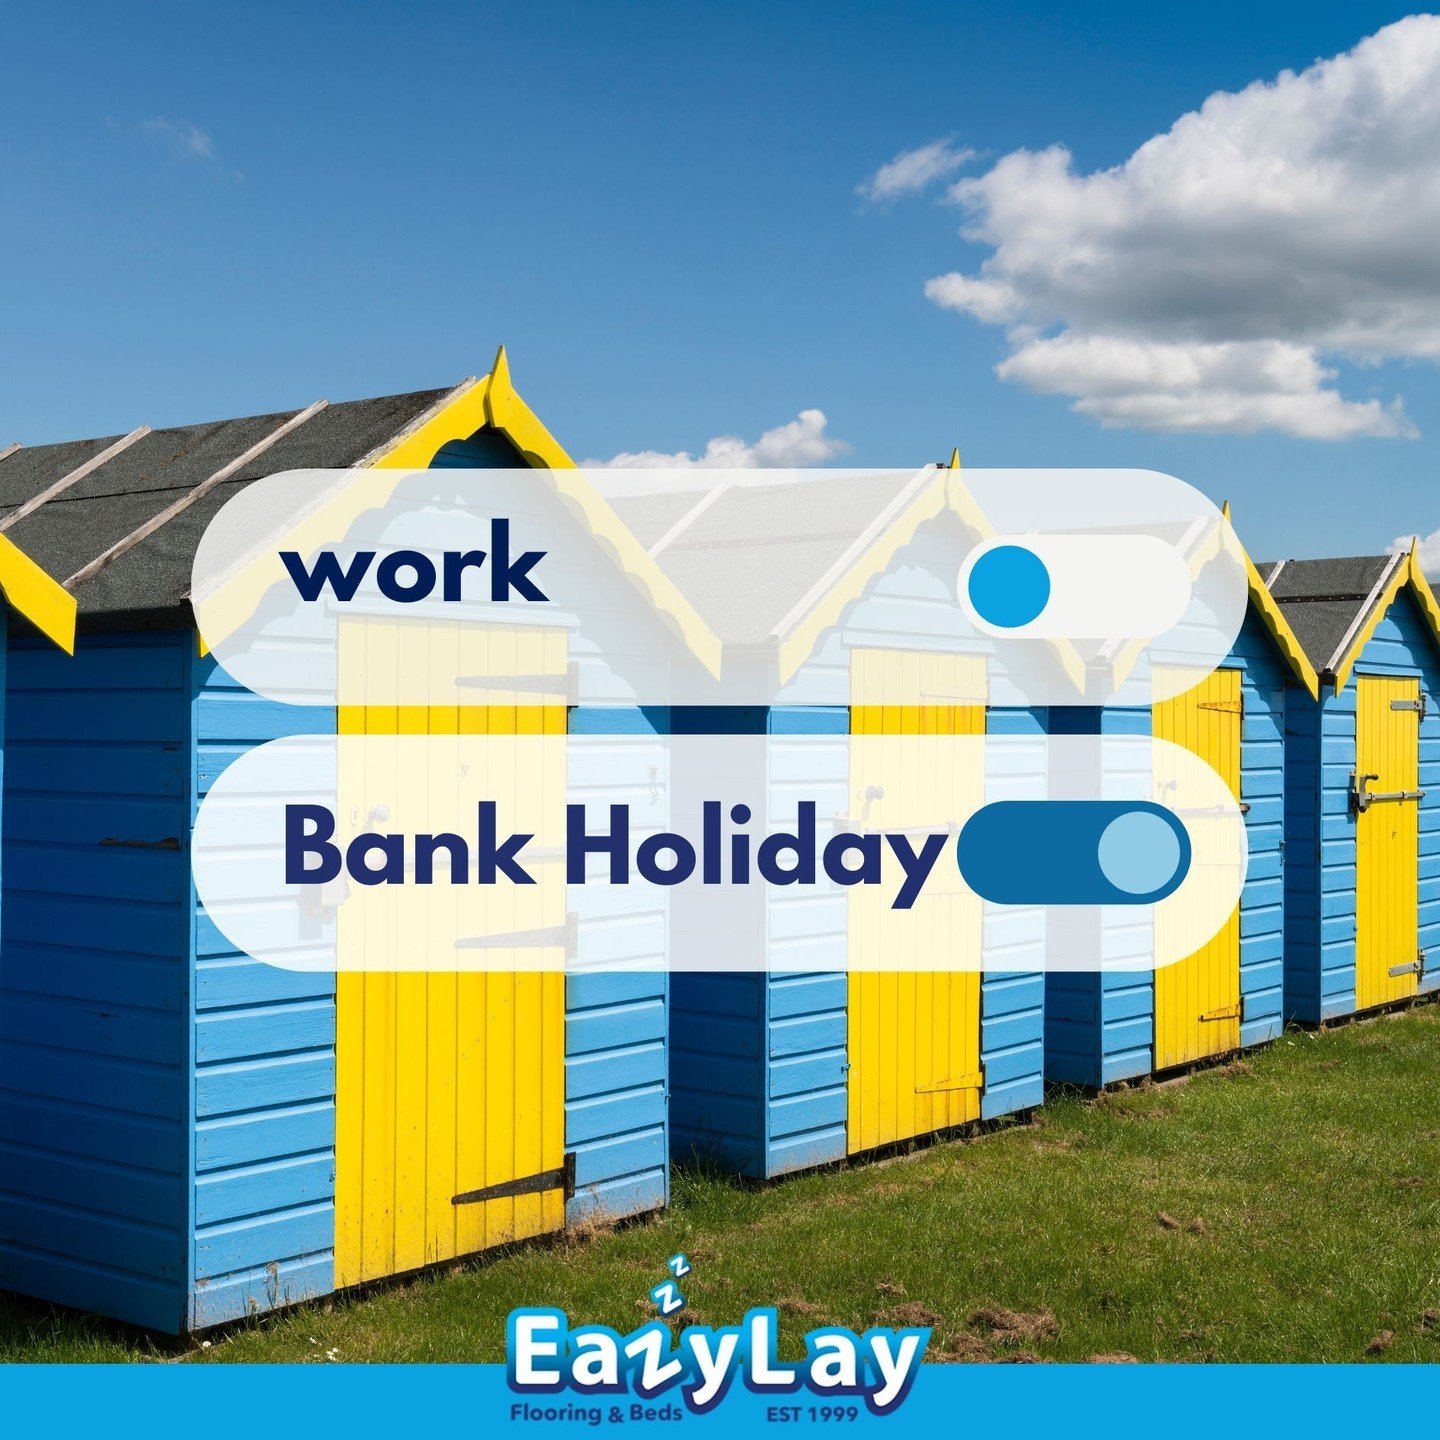 🌟 Enjoy the May Bank Holiday with loved ones! Please note, we'll be closing at 1pm on Saturday and reopening Tuesday. Have a wonderful long weekend from the EazyLay family! 🌼